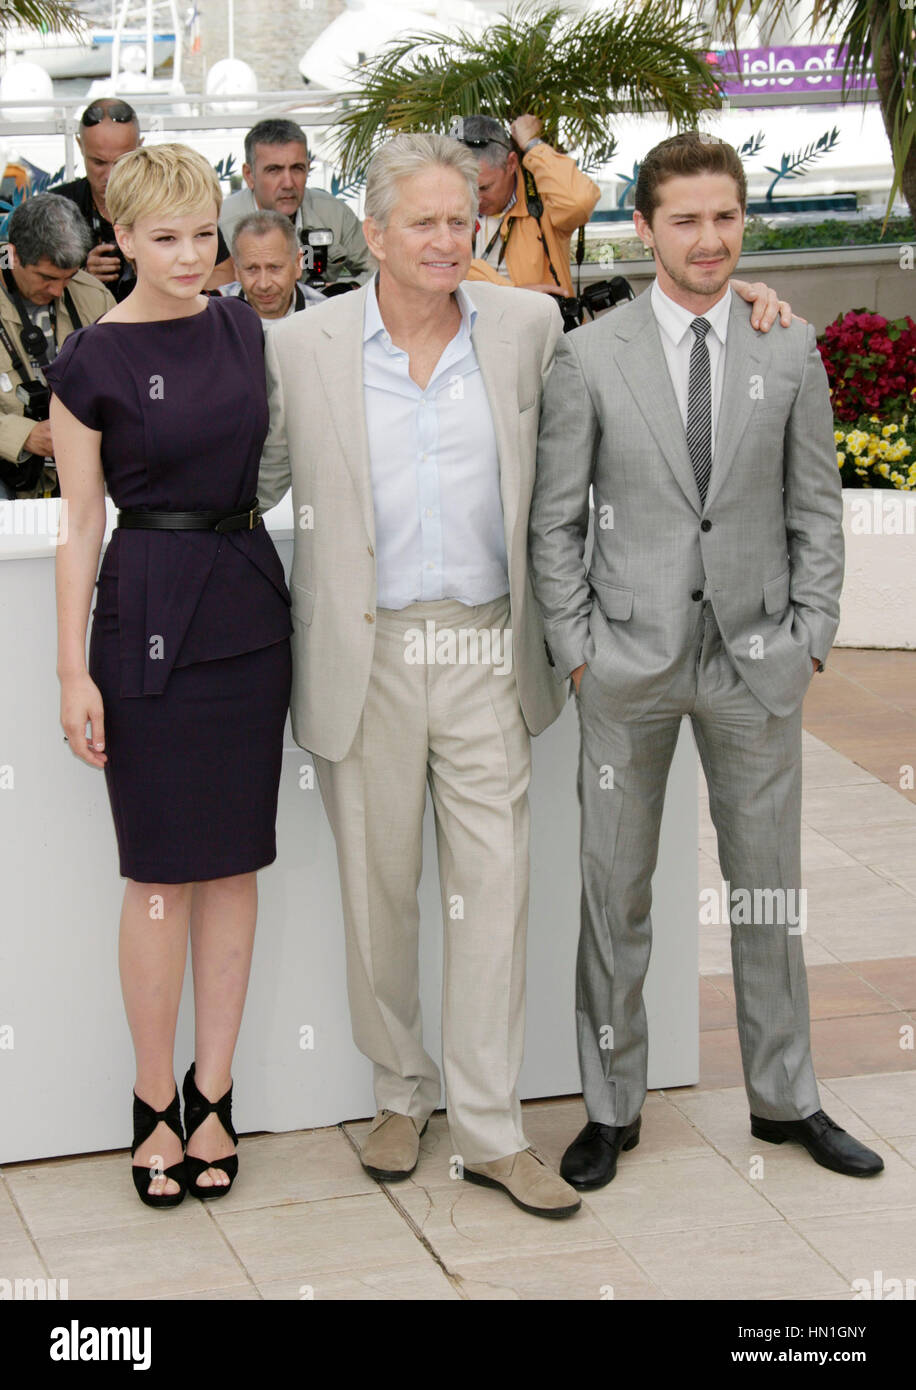 From left,Carey Mulligan,  Michael Douglas, and Shia LaBeouf at the photocall for the film 'Wall Street: Money Never Sleeps', at the 63rd Cannes Film Festival in Cannes, France on May 14, 2010. Photo by Francis Specker Stock Photo